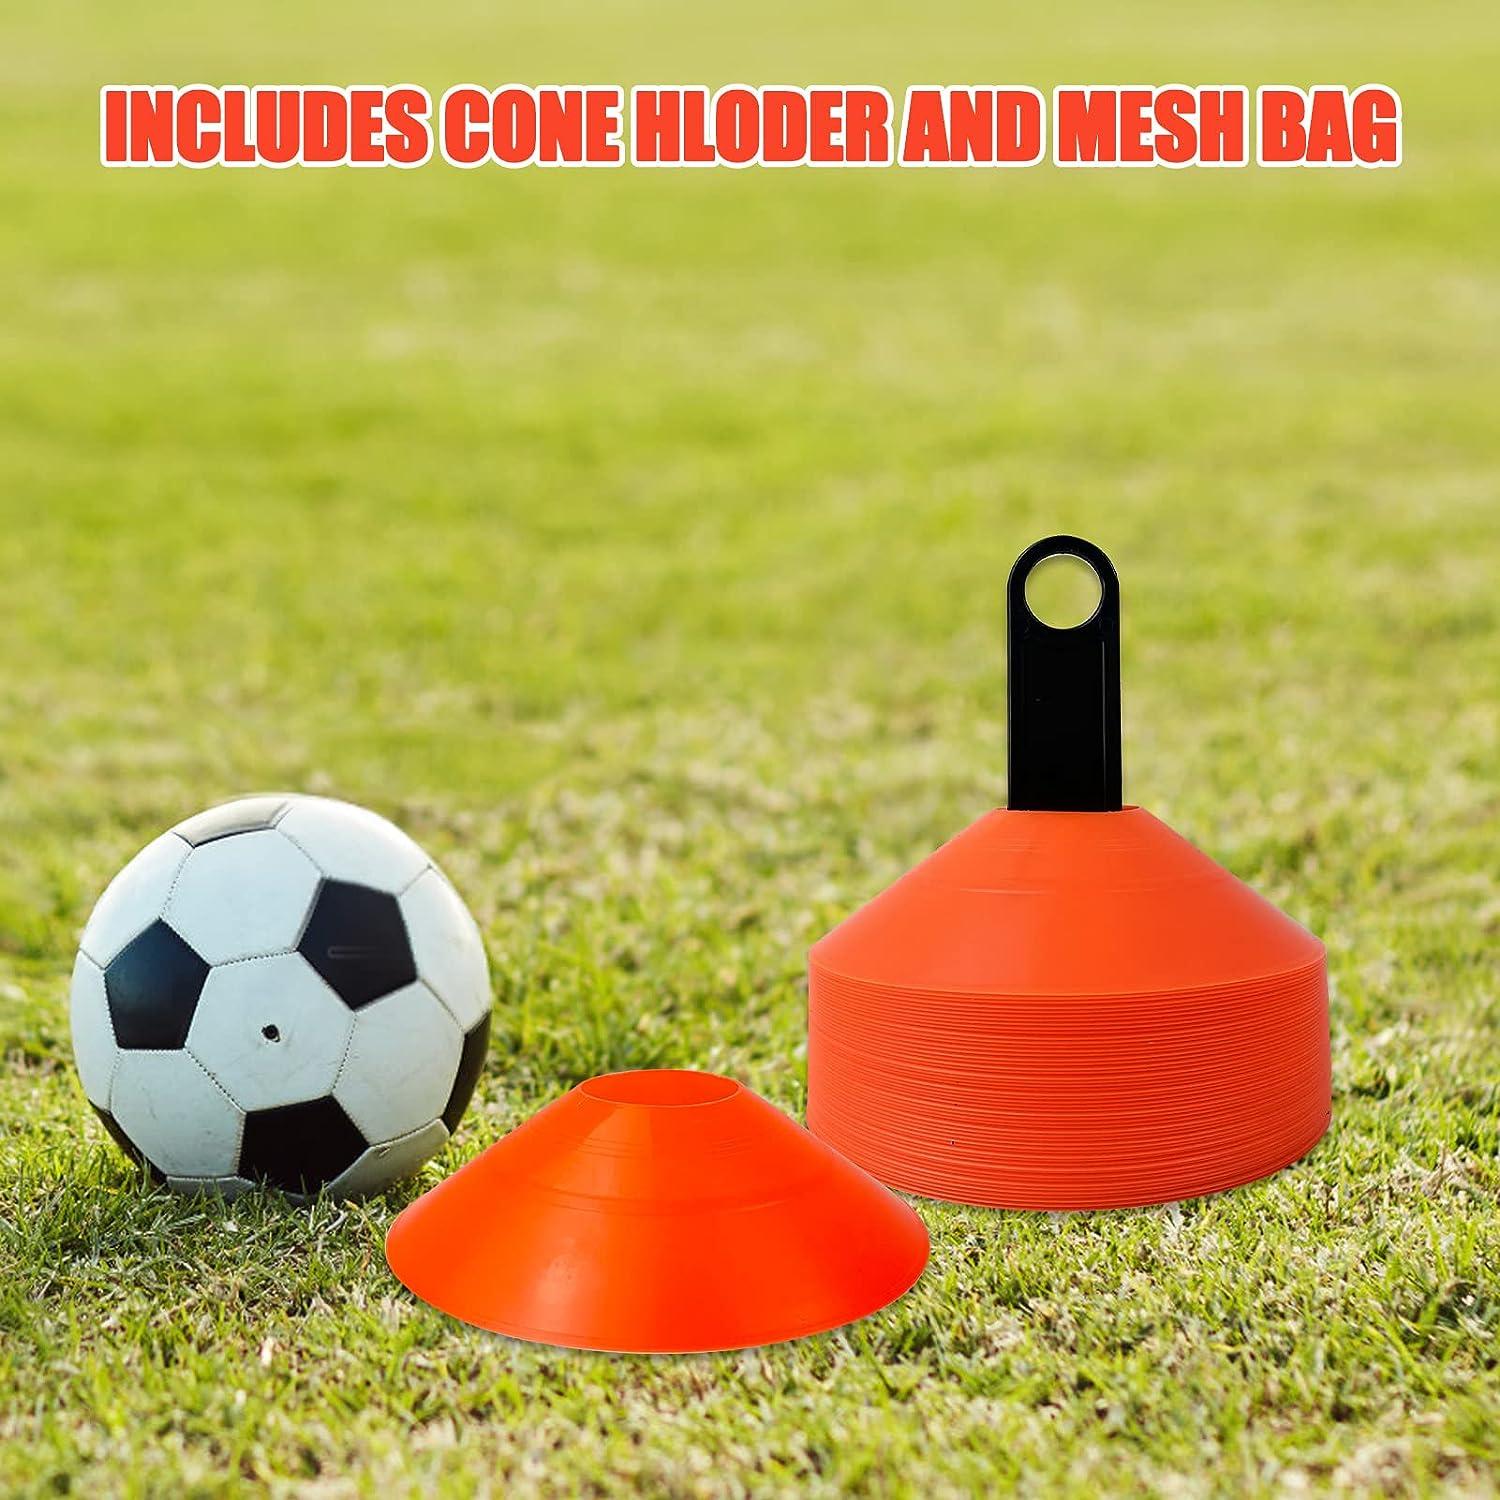 Wensdr Set of 50 Soccer Agility Training Cones with Carry Bag and